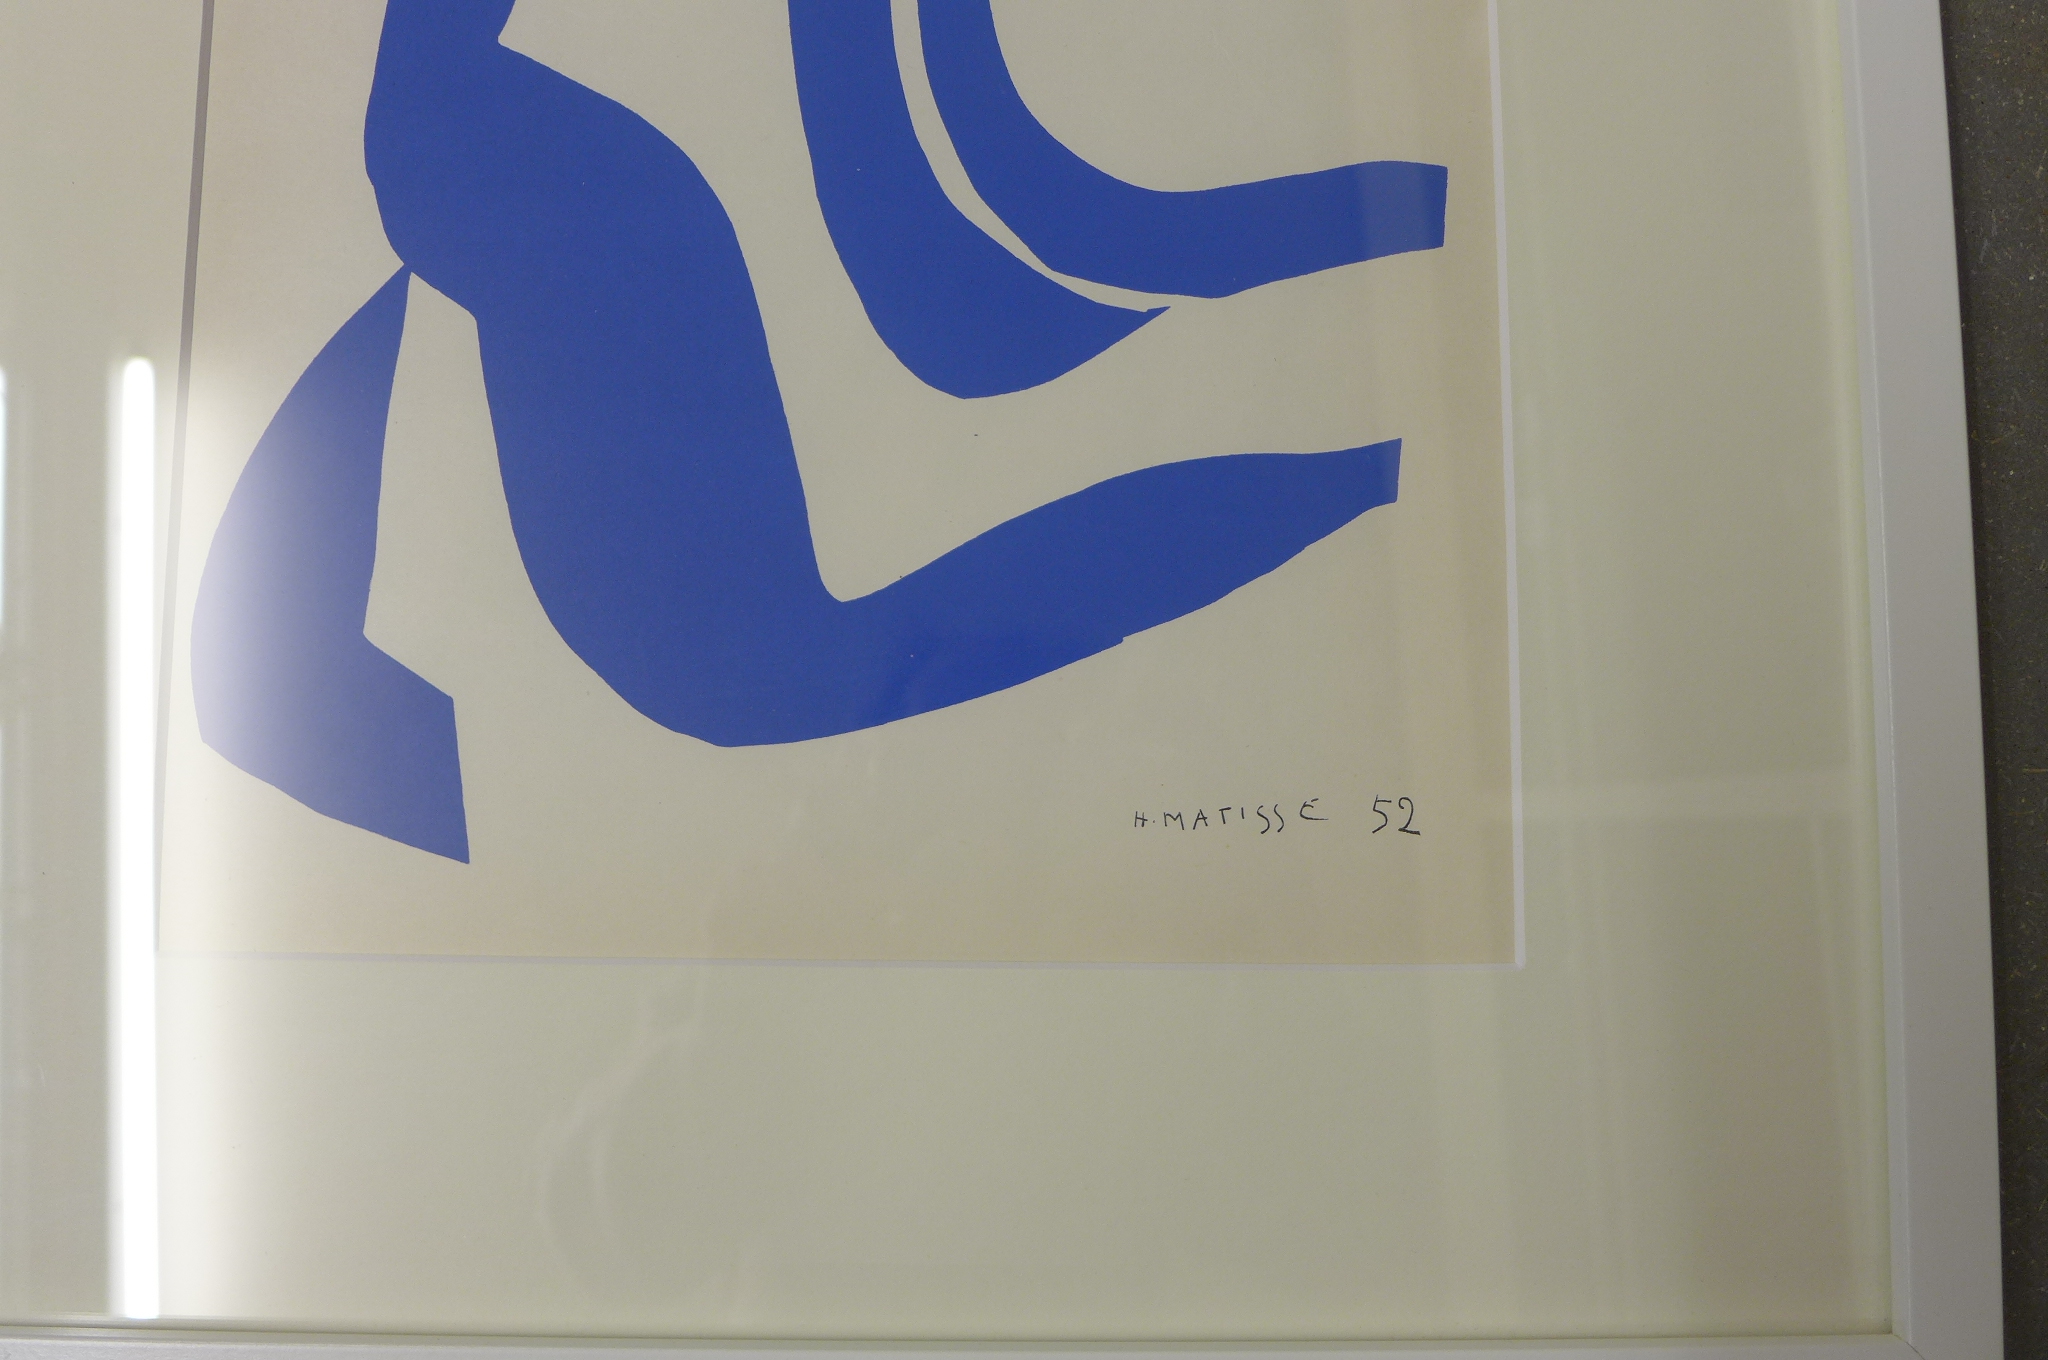 Henri Matisse - original lithograph 1954 - Blue Nude XI - printed by Mourlot, - Image 2 of 3